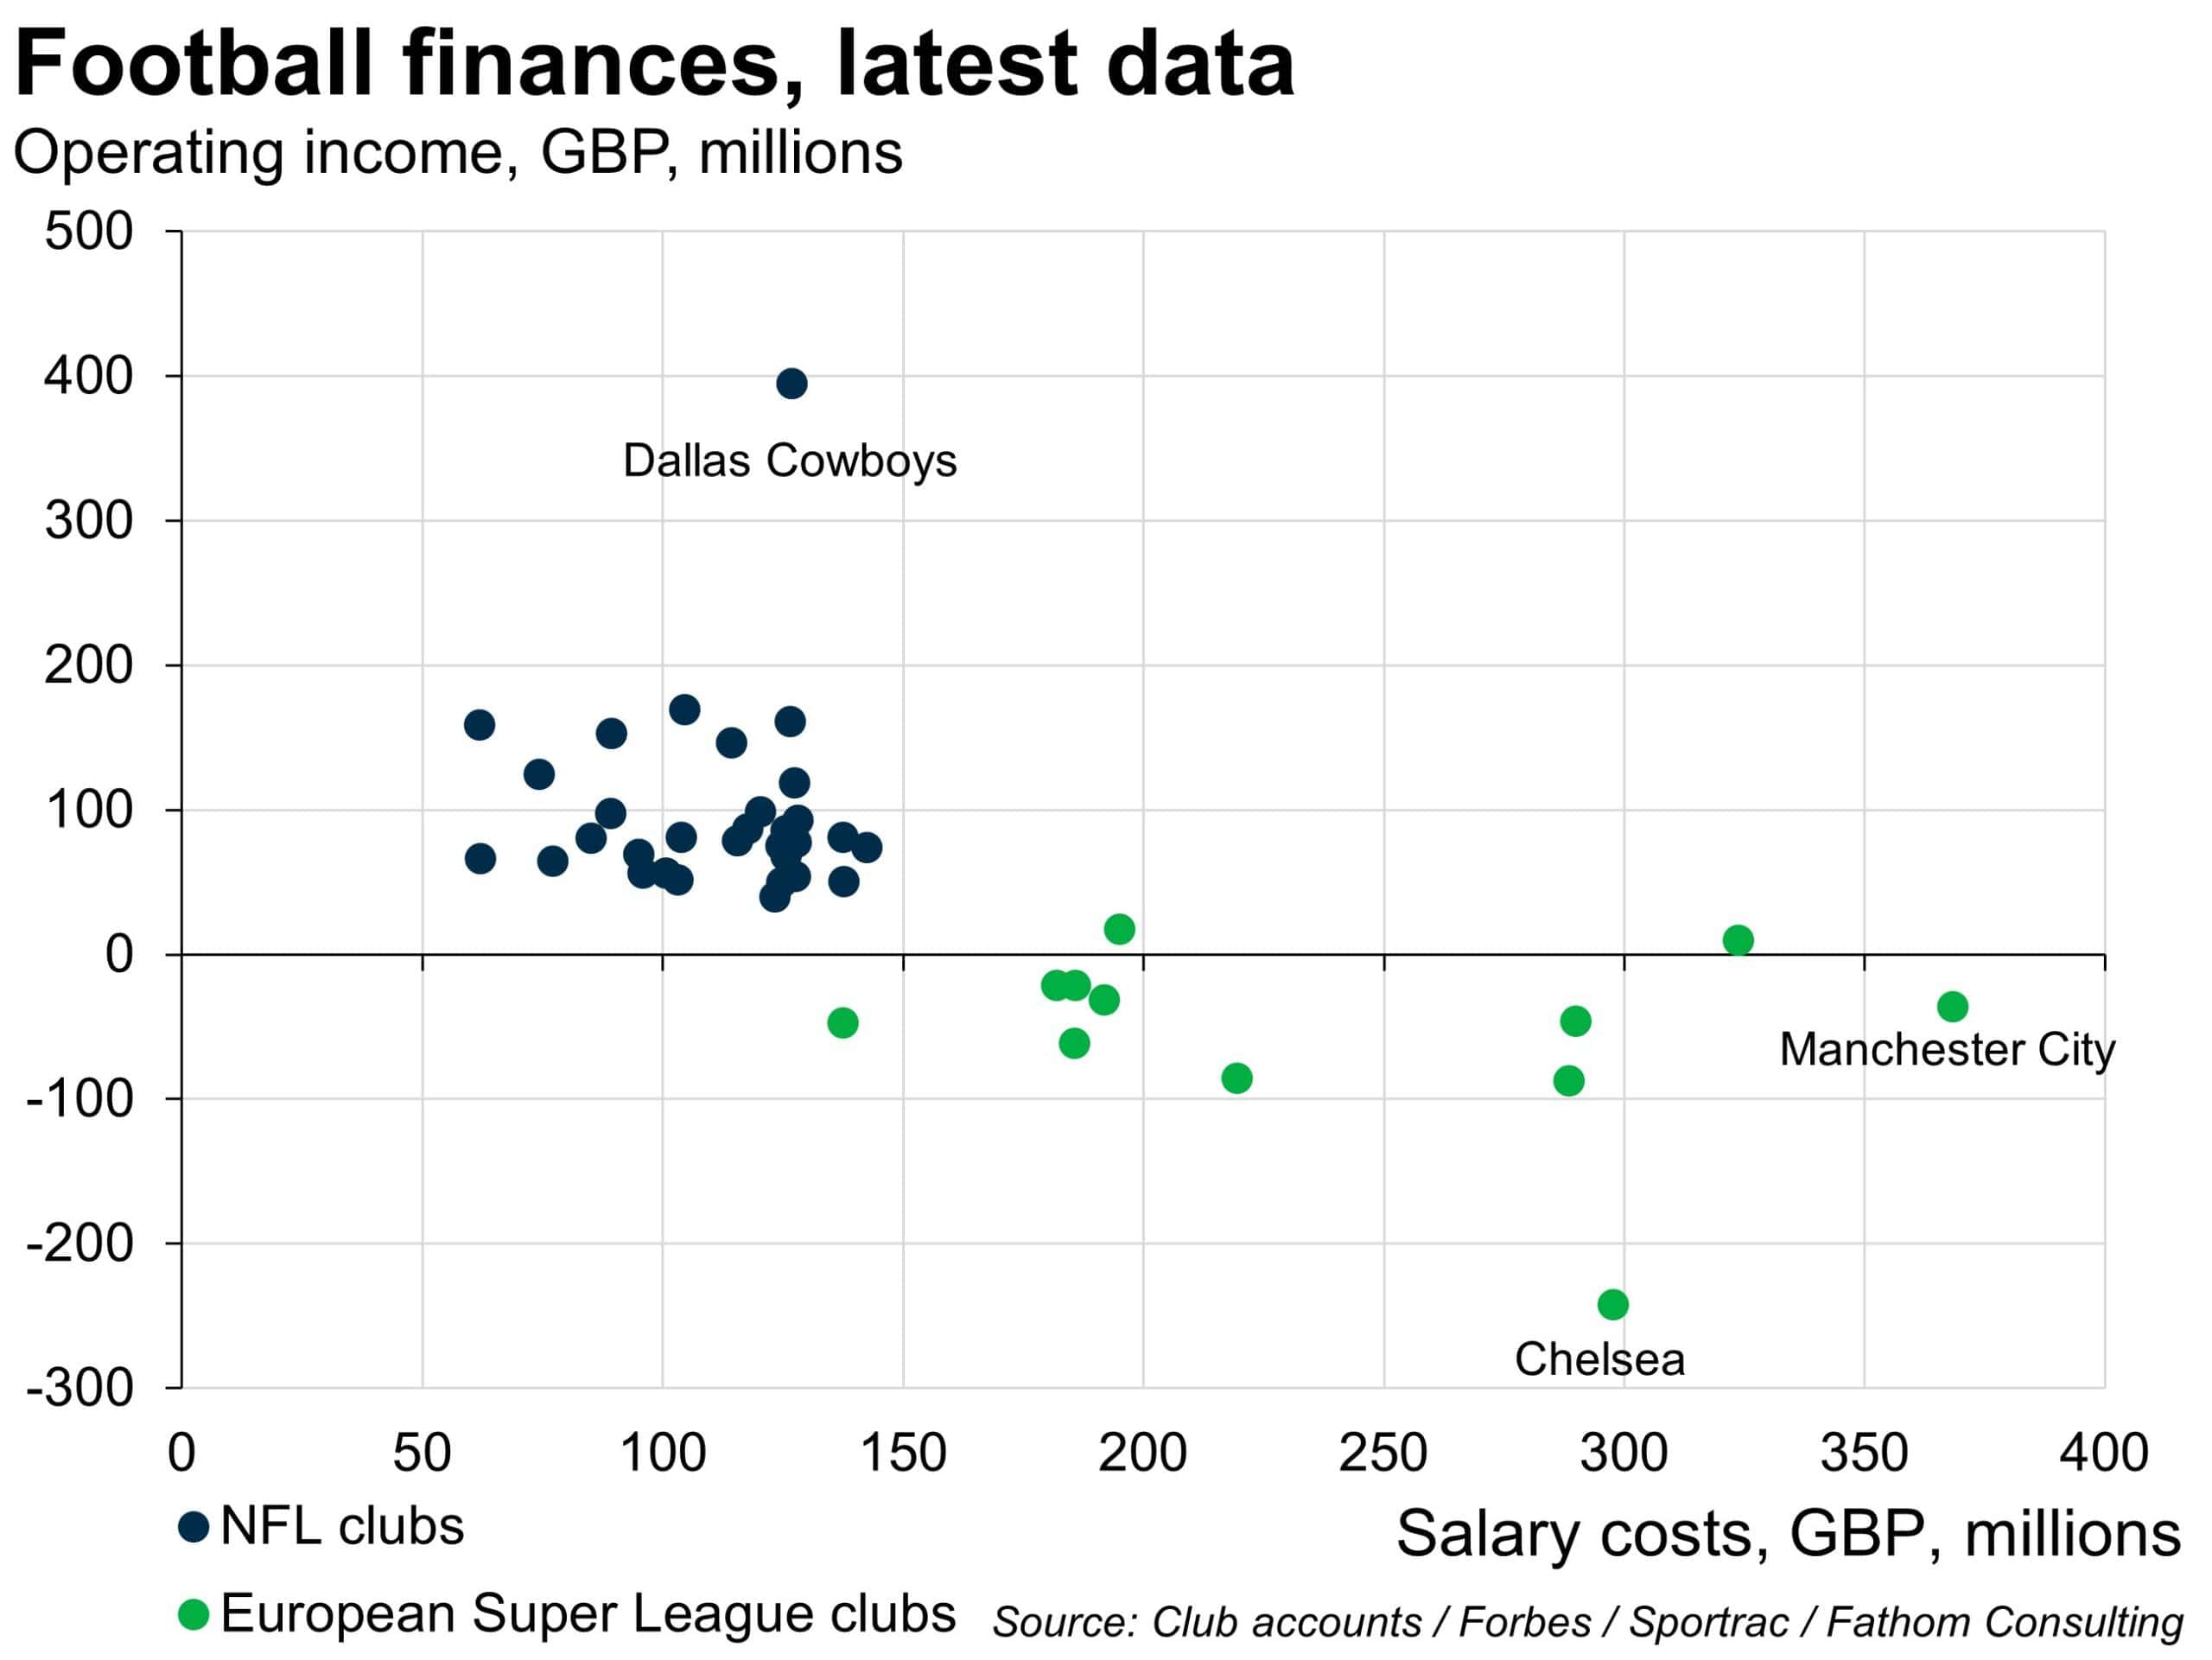 Super League football clubs are mainly loss-making